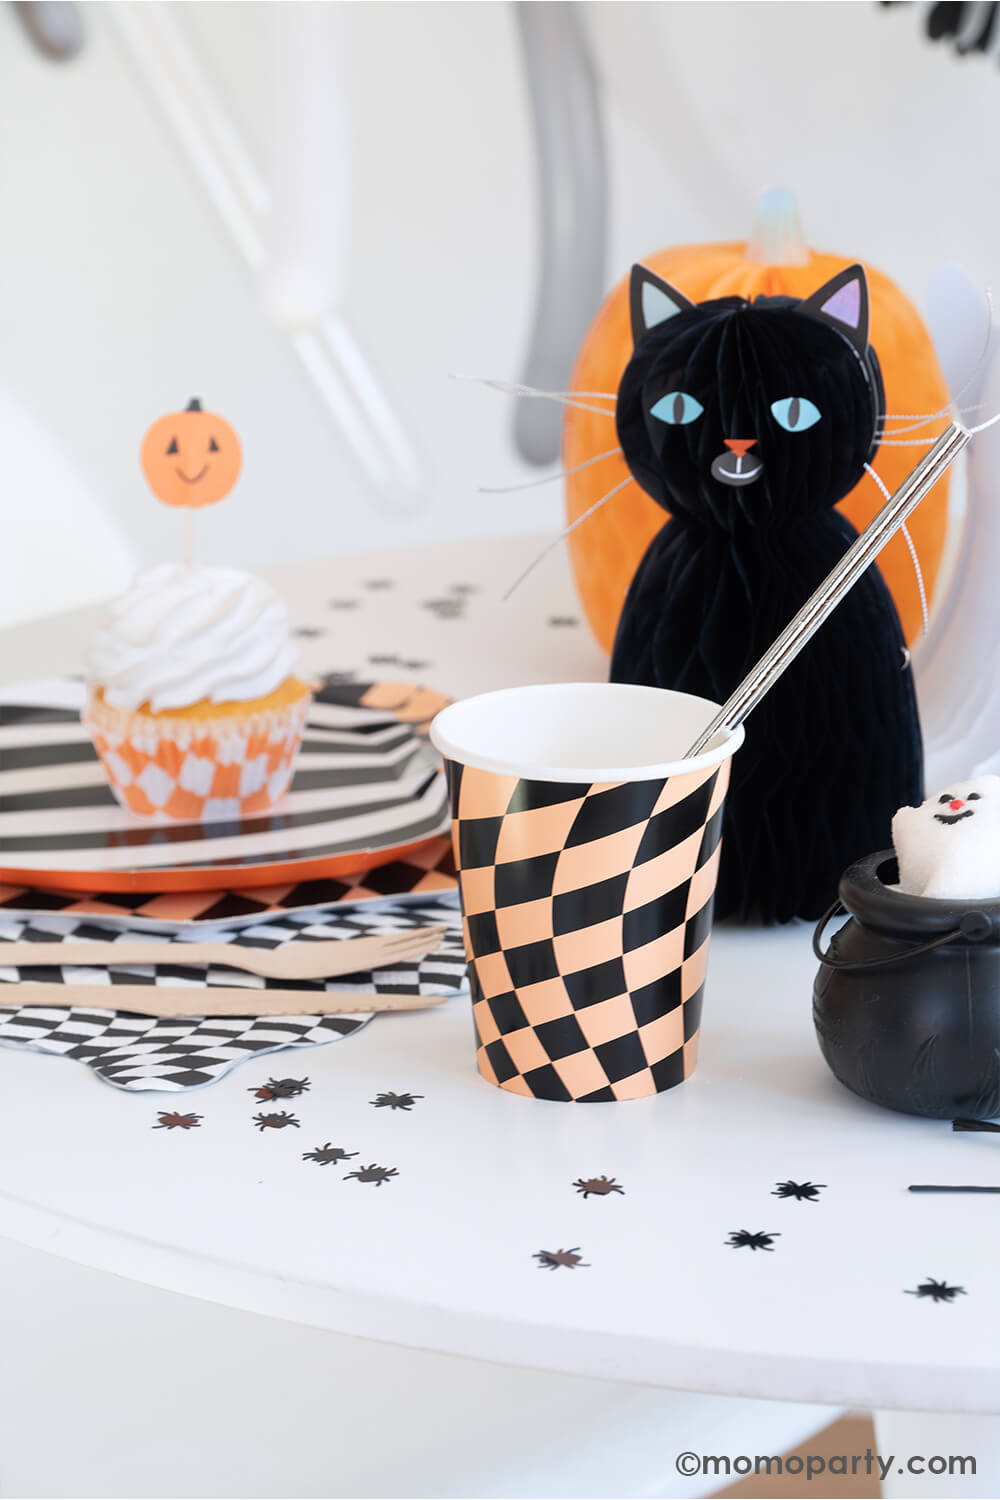 A fun Halloween party table in the classic black and orange colors featuring Momo Party's Halloween Checker Plates, napkins and party Cups by Meri Meri. On the table spider shaped confetti is scattered with honeycomb cat and pumpkin paper decorations as the centerpiece. At the corner there's a mini cauldron container filled with ghost shaped marshmallow treats. All makes a fun and whimsy inspiration for kid's friendly Halloween party ideas.